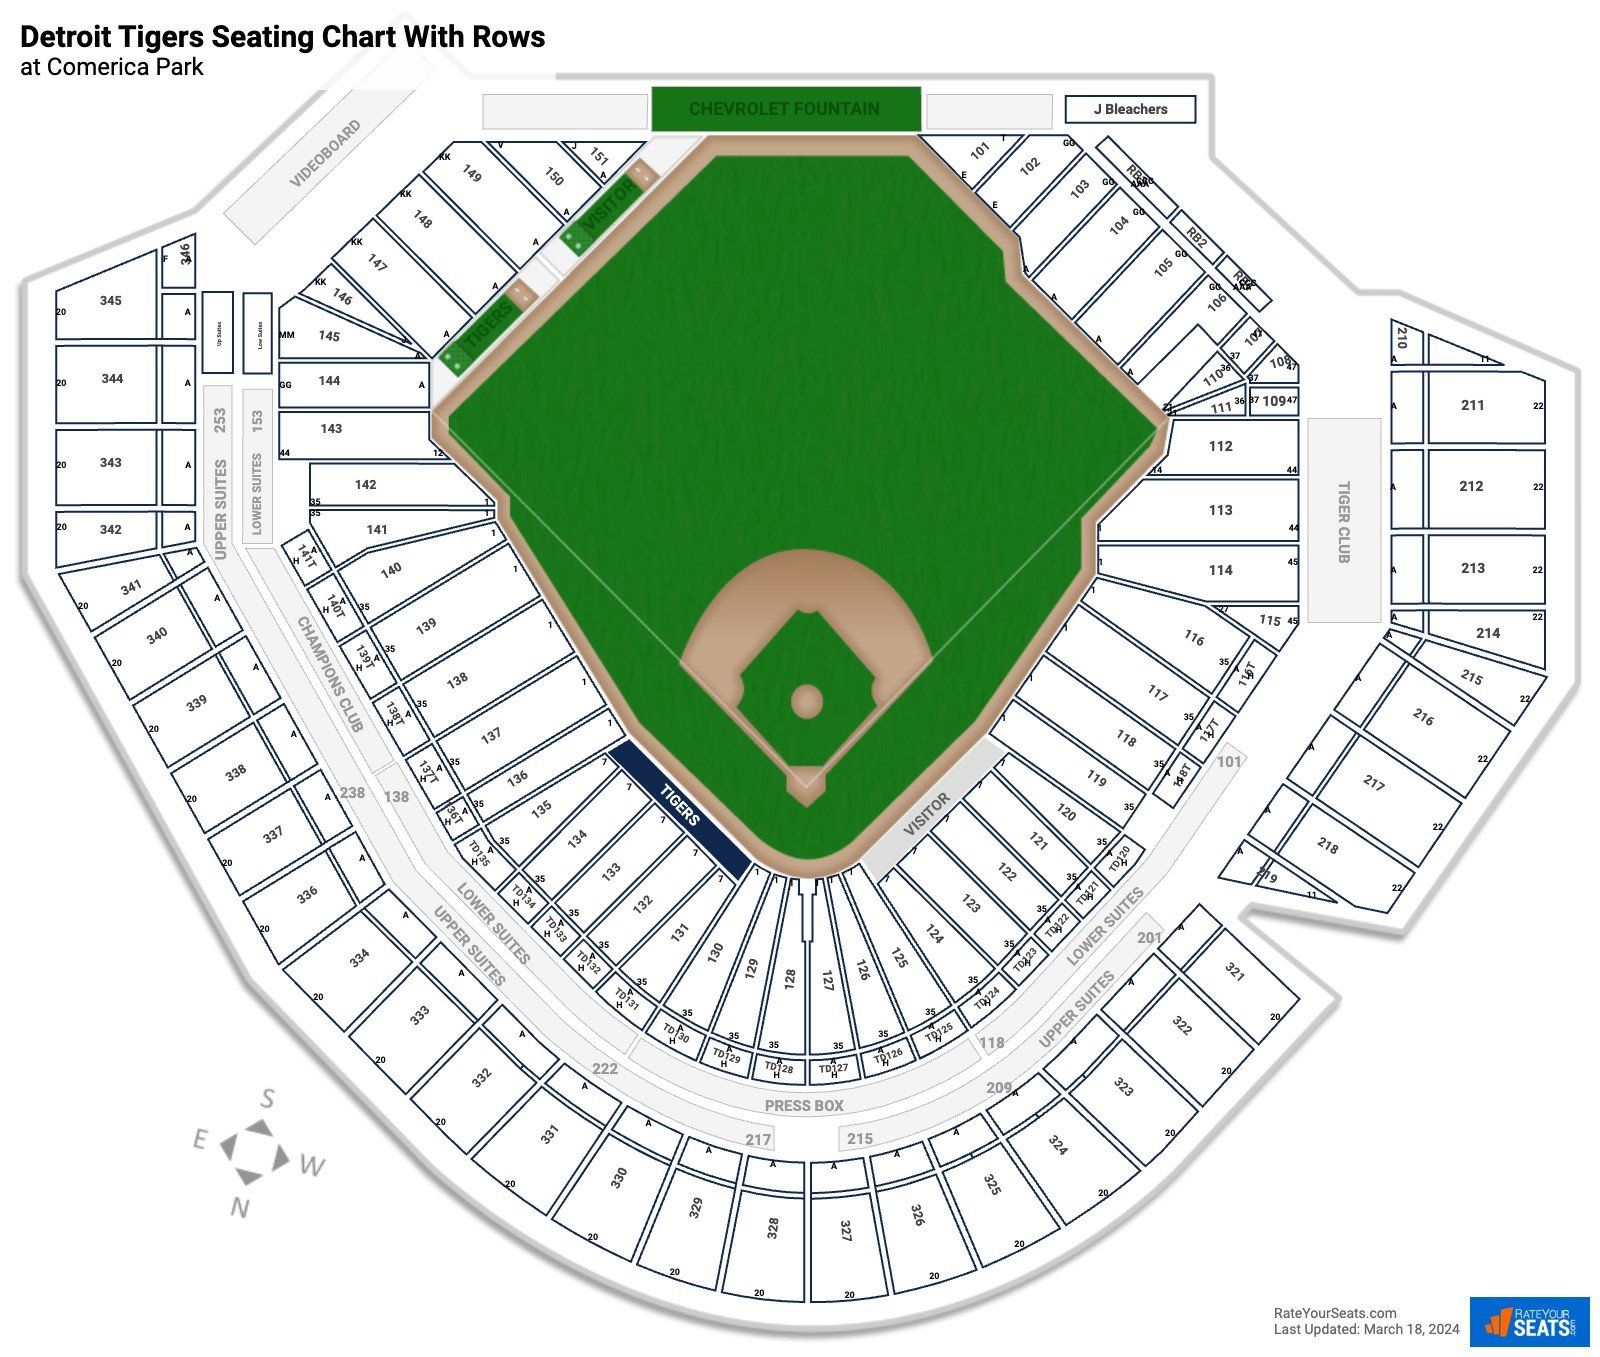 Comerica Park seating chart with row numbers